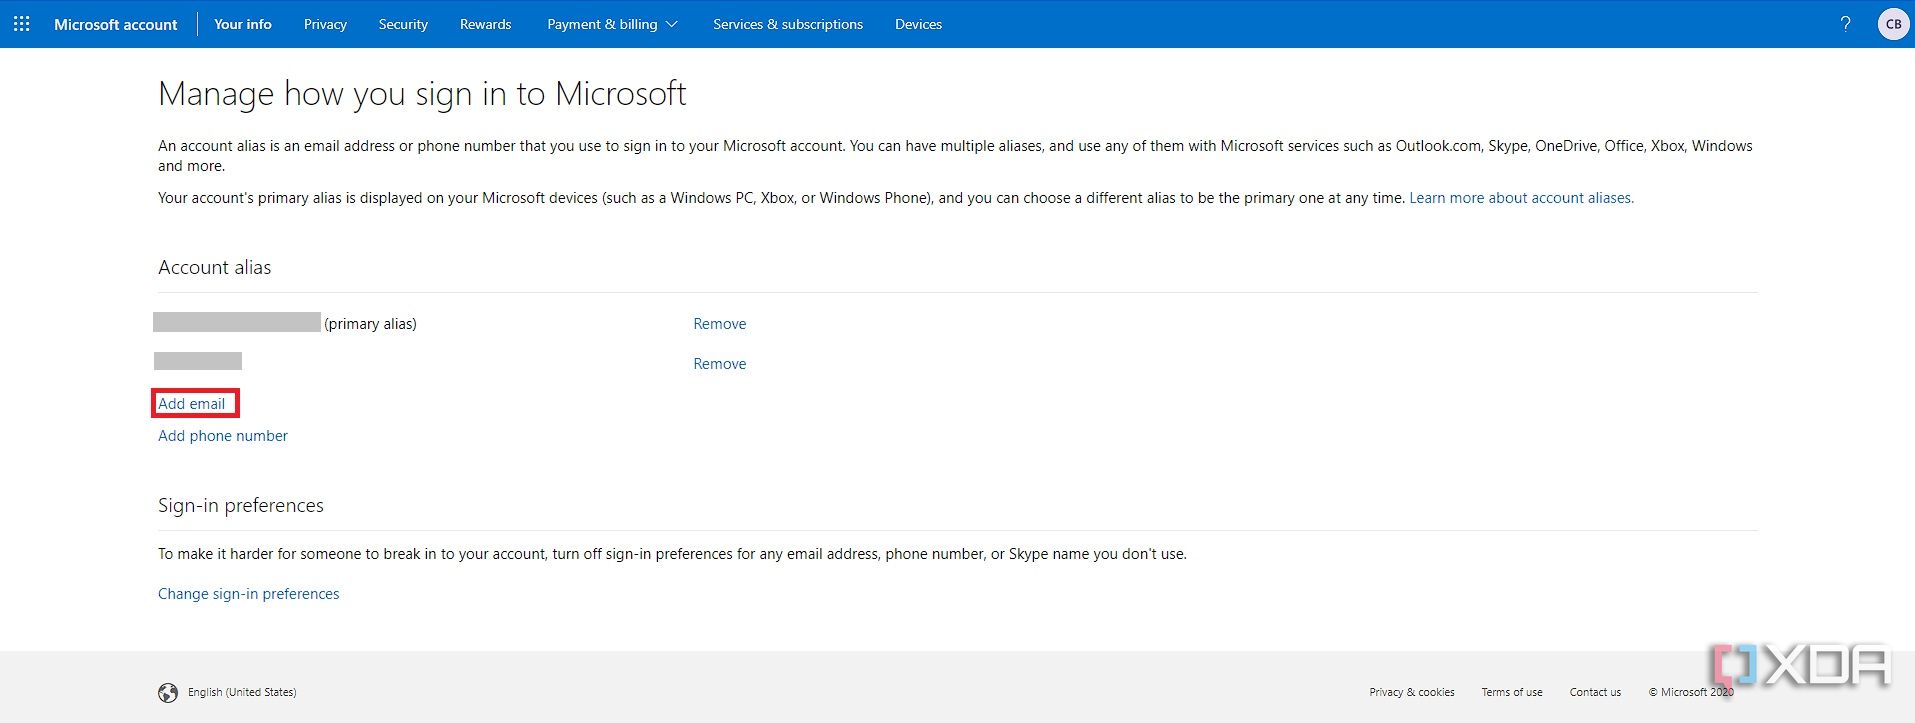 Add email to Microsoft account